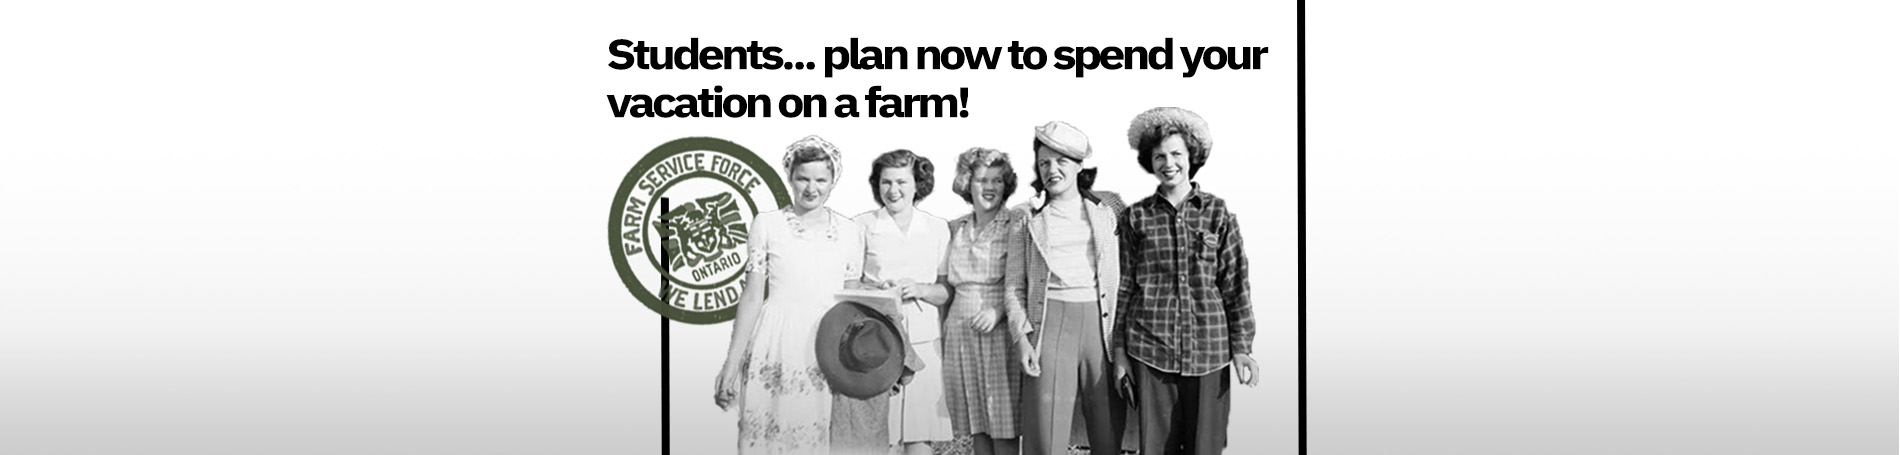 Farmerettes with text, "Students...plan now to spend your vacation on a farm!"